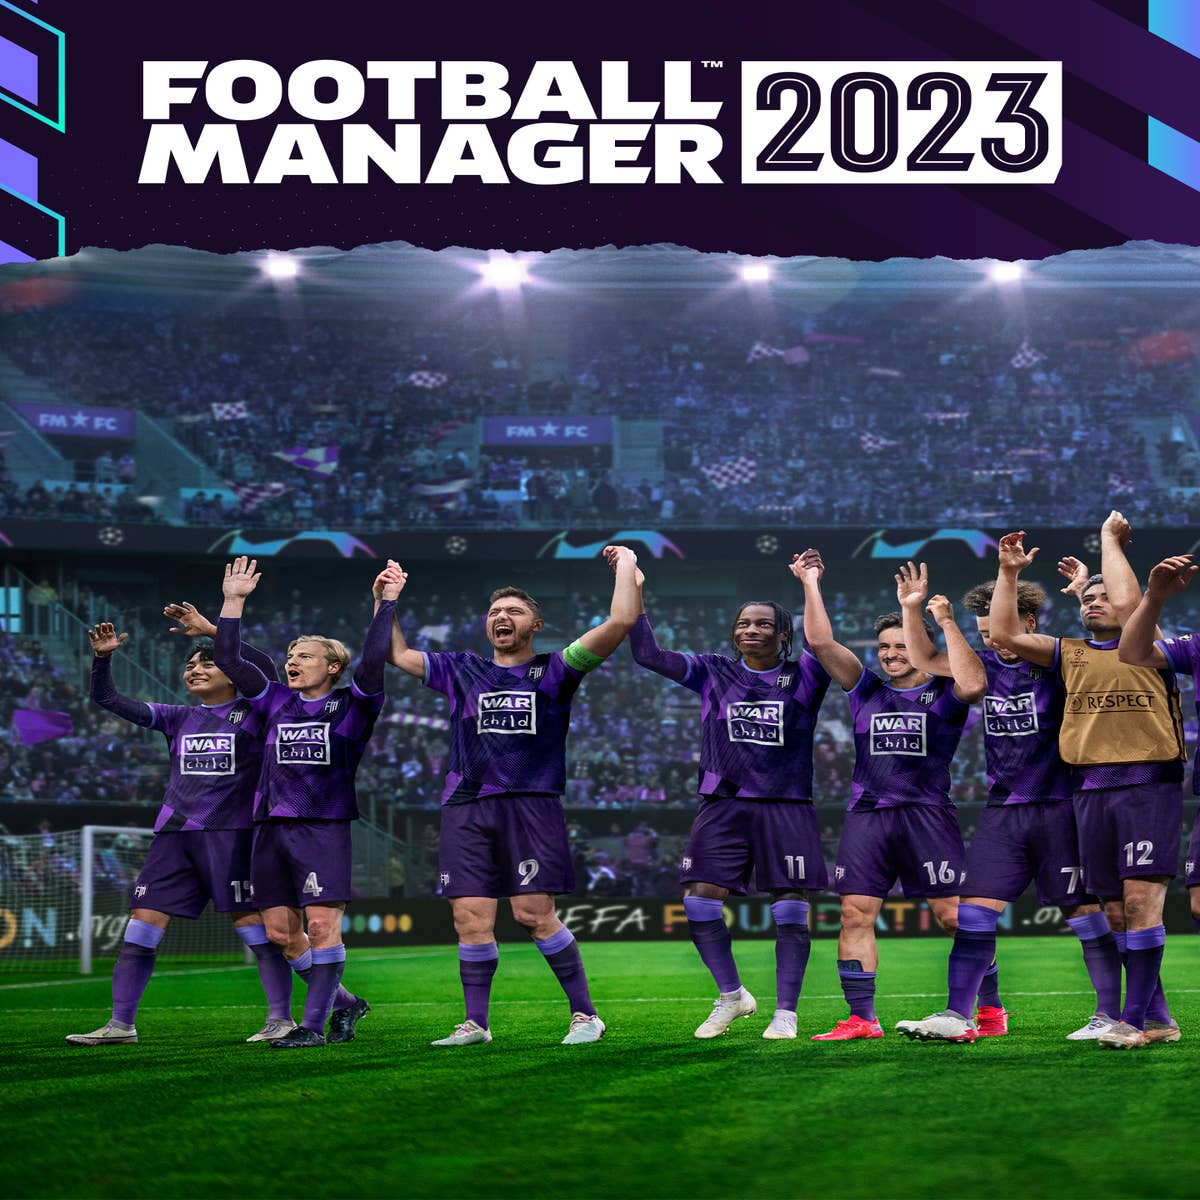 Football Manager 2023 kicks off  Prime Gaming's monthly free games  for September